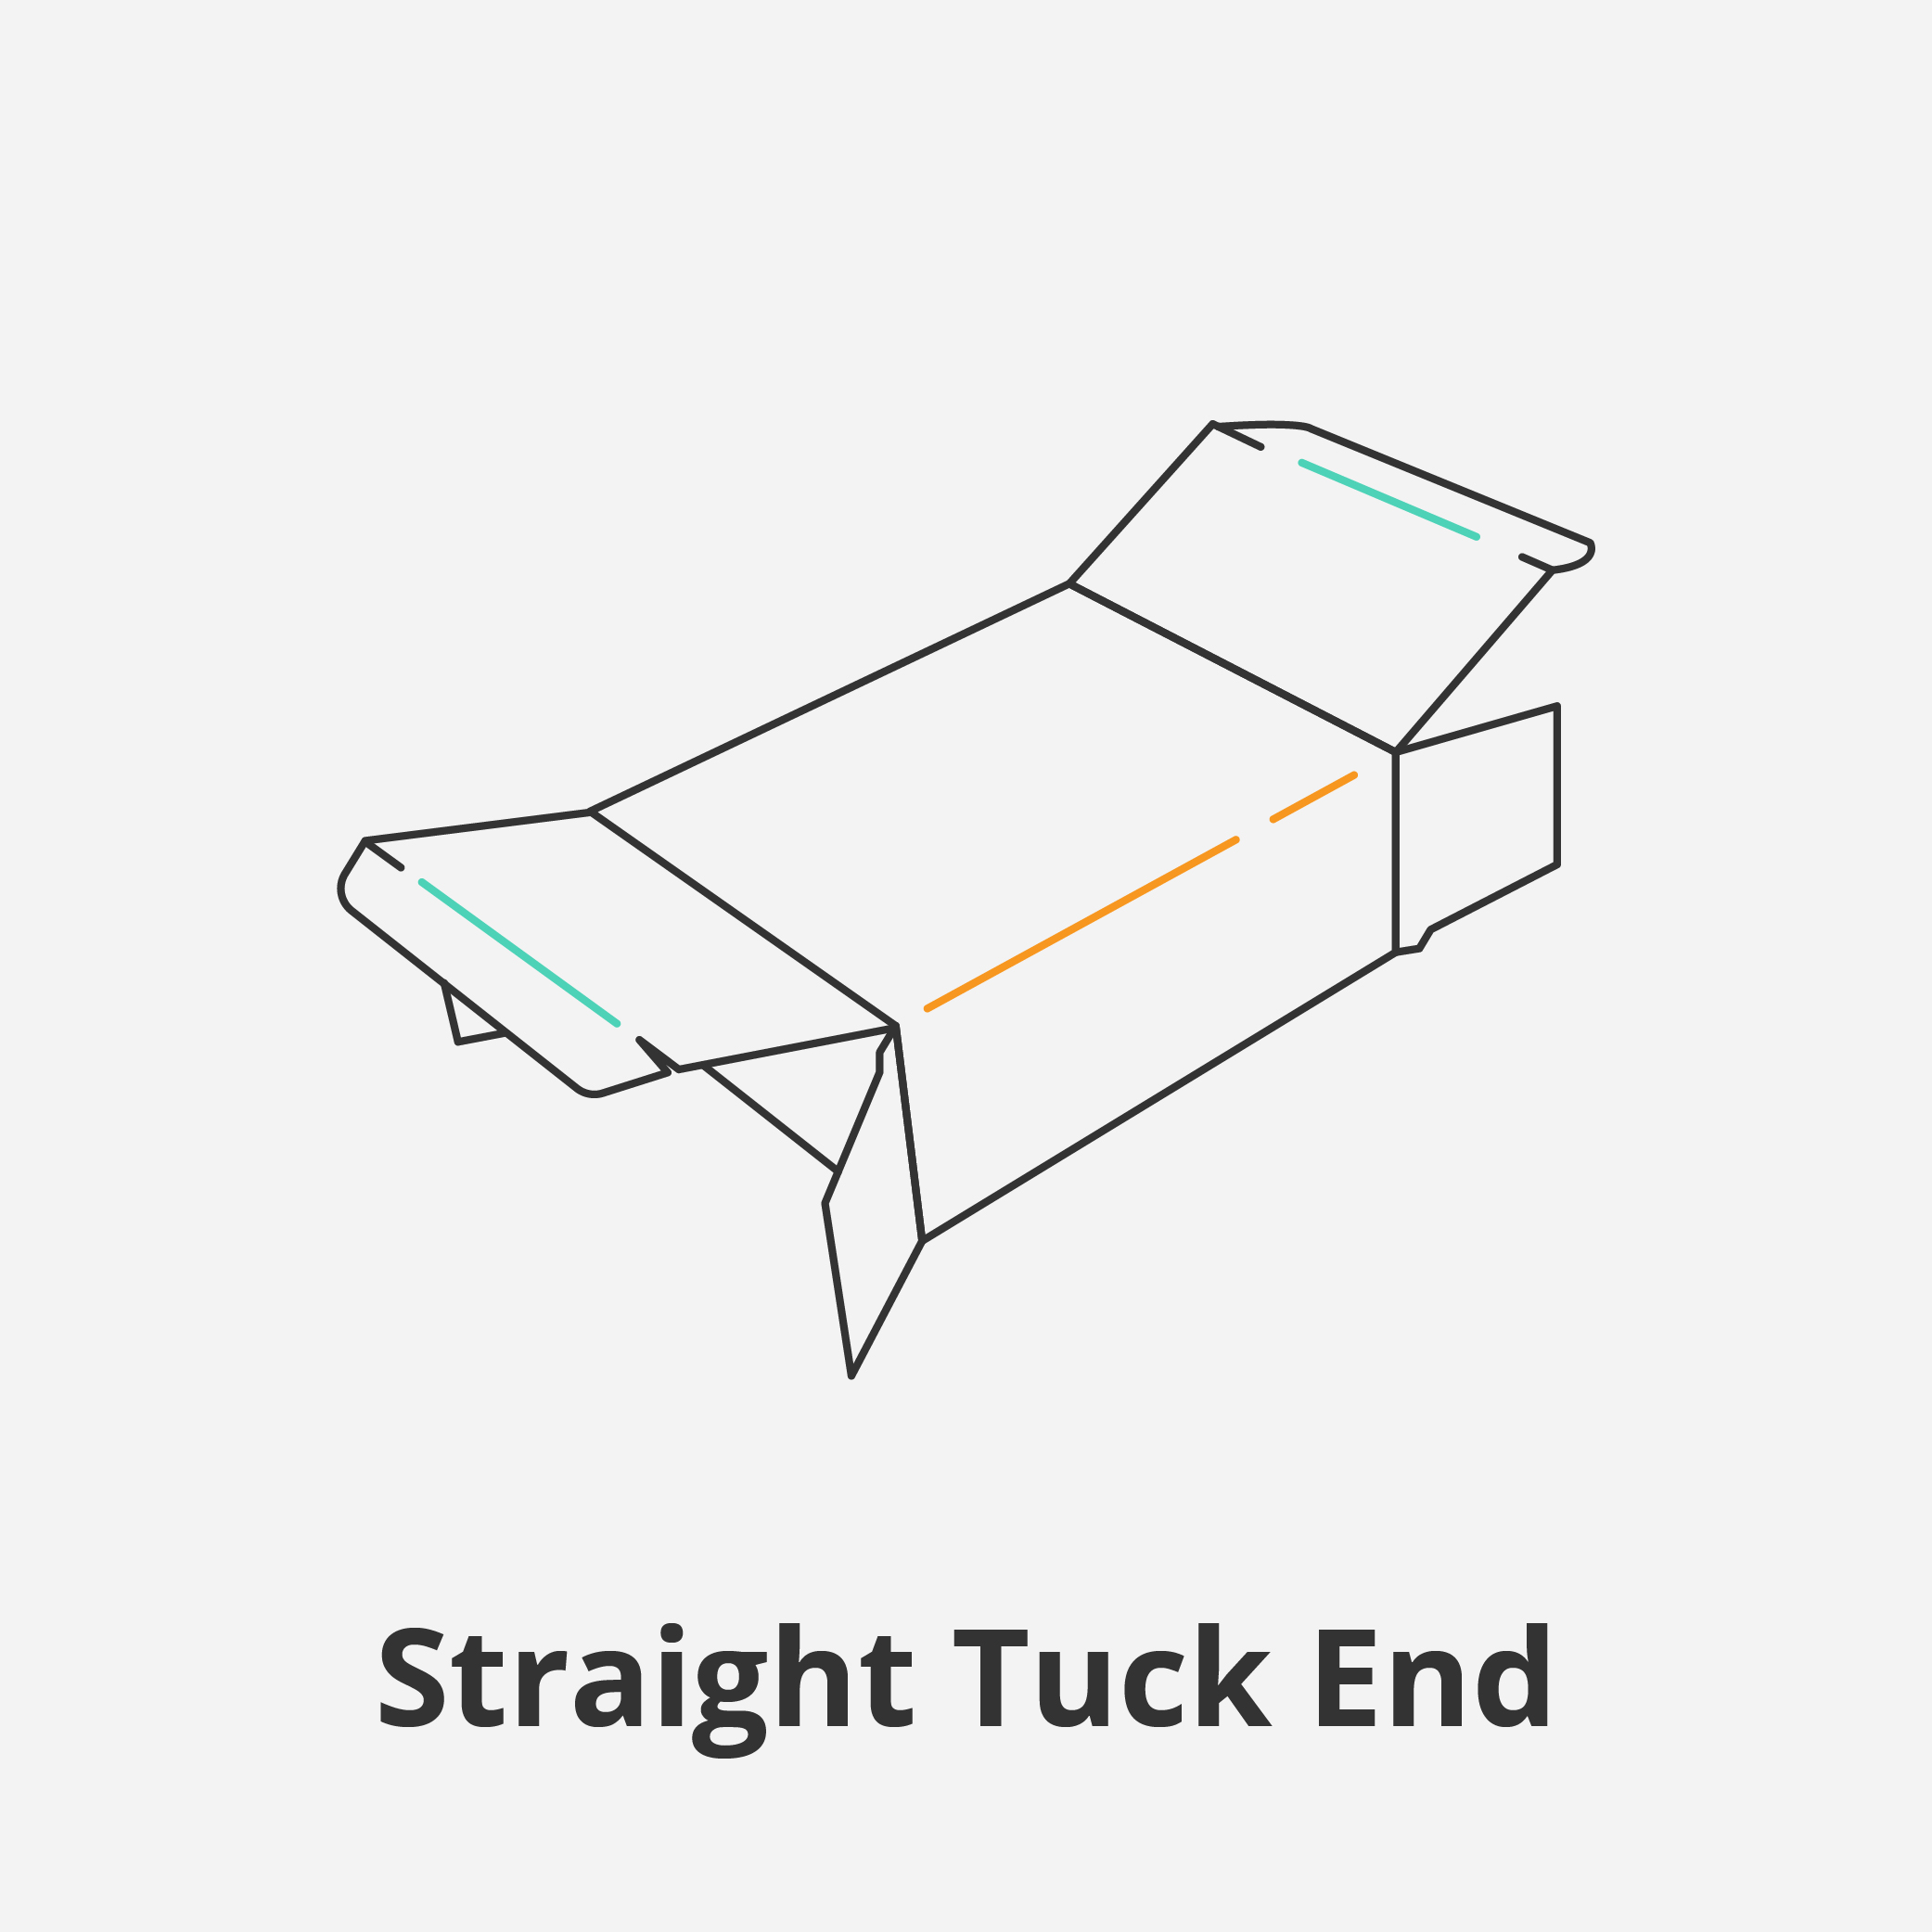 Straight Tuck End